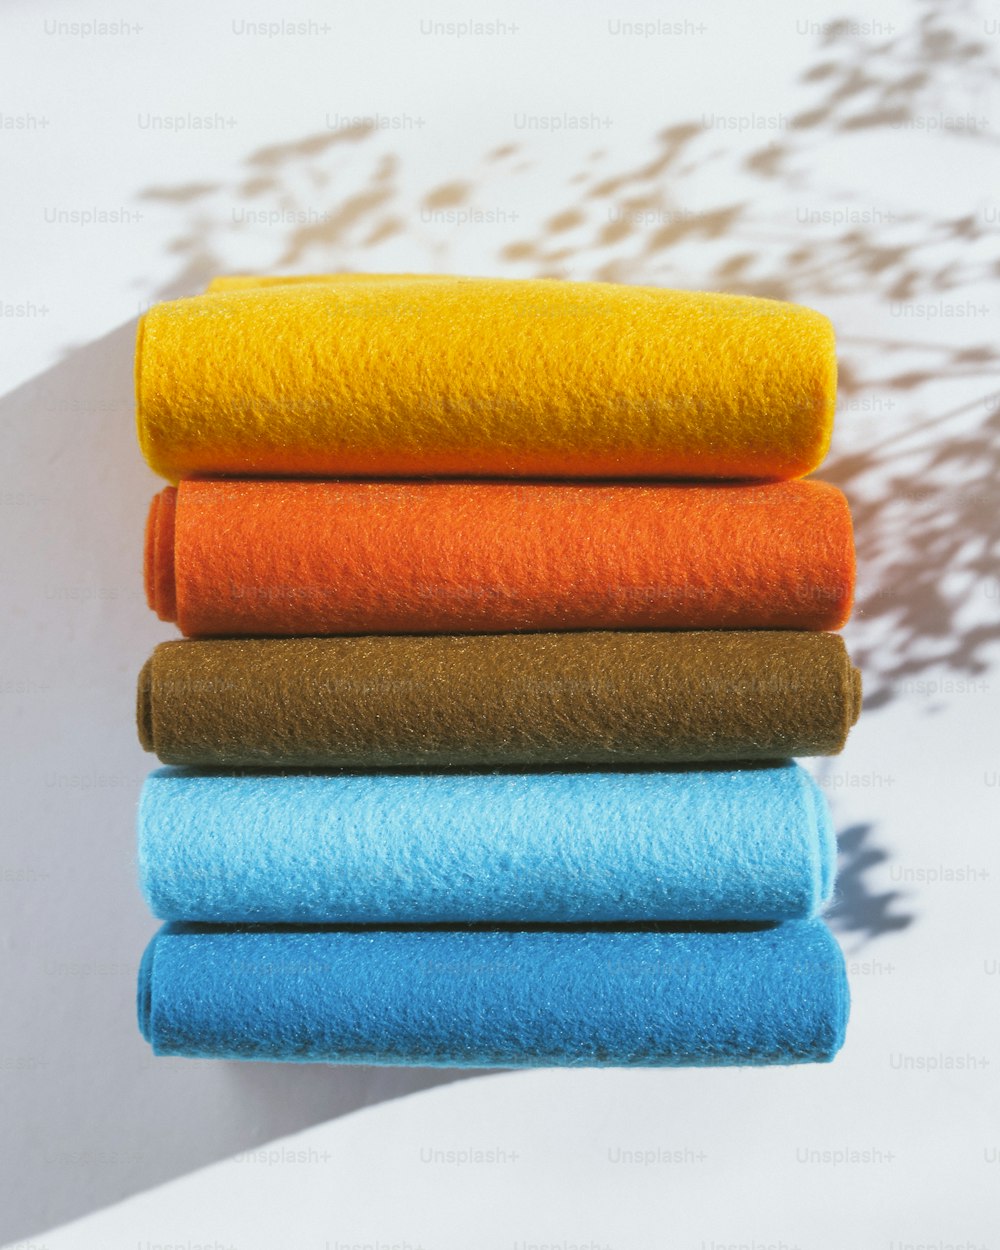 a stack of different colored towels on top of each other